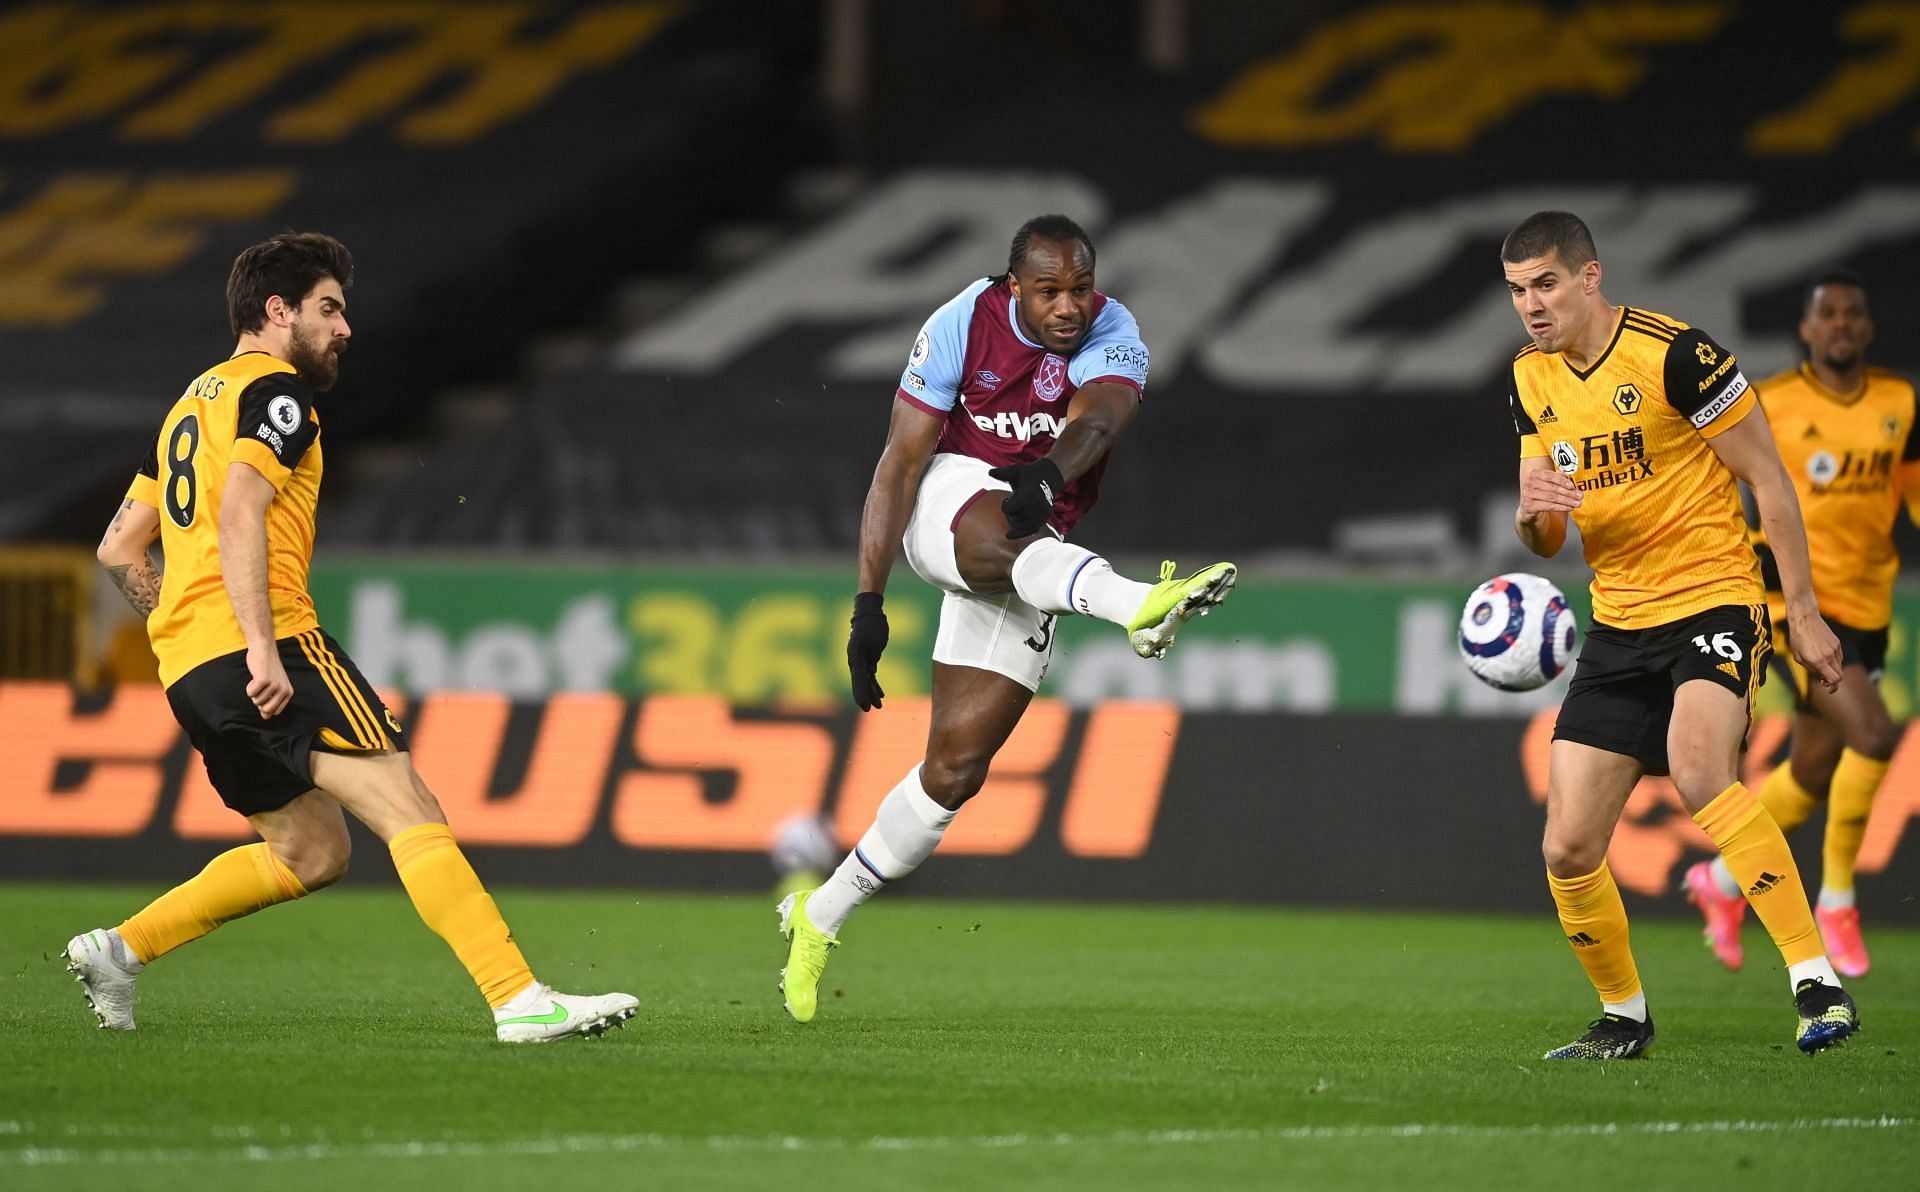 Wolverhampton Wanderers vs West Ham United Prediction and Betting Tips -  20th November 2021